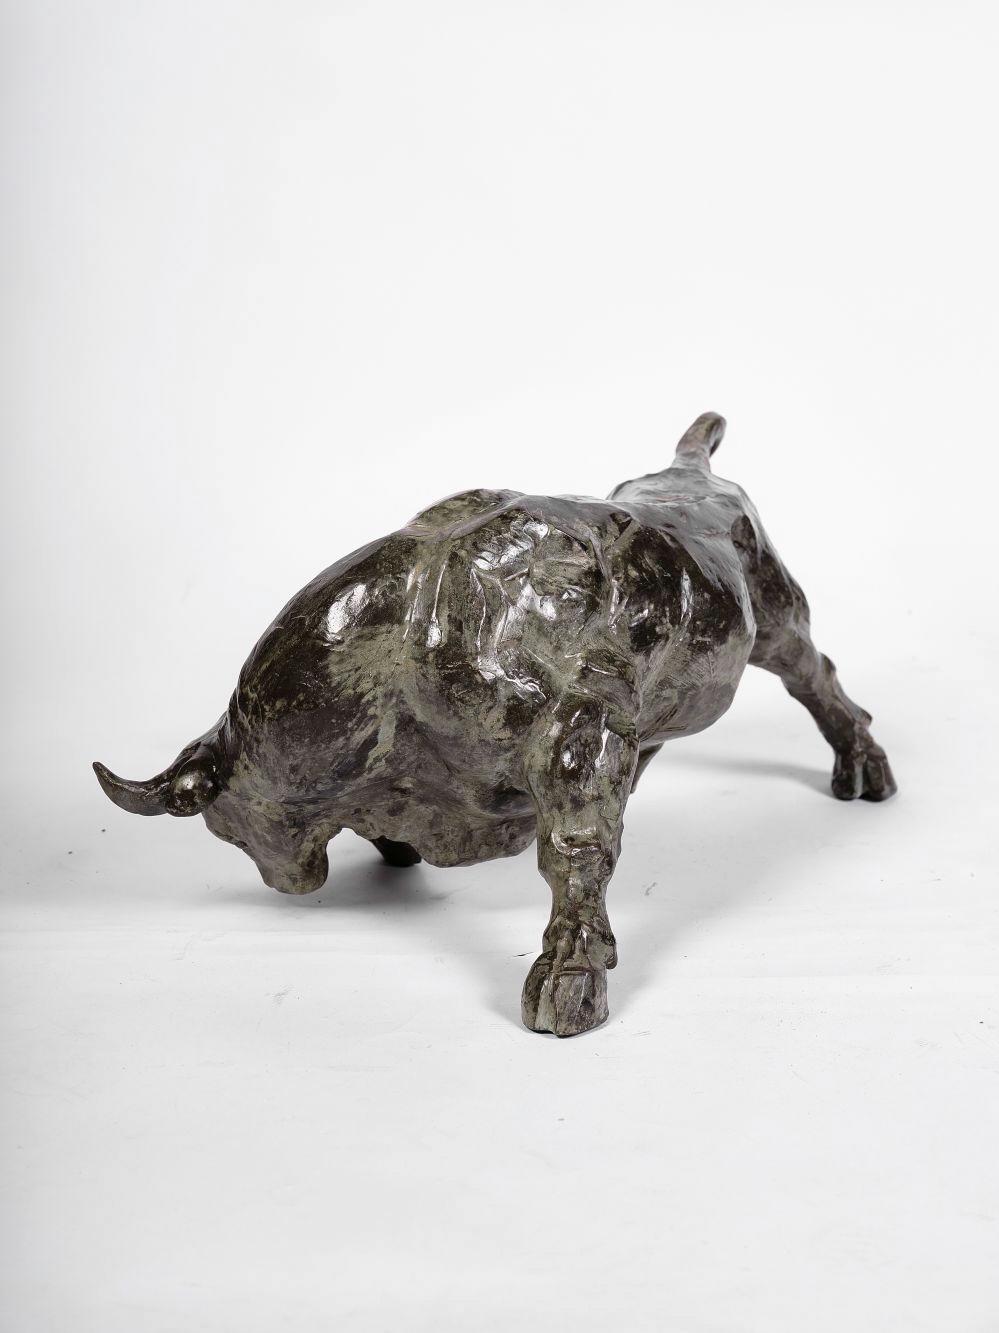 This sculpture, created in 2018, made of brown patinated bronze (unique differentiated patine for each piece), thanks to the lost wax process, represents a massive bull in a strong moving position. 

Numbered scultpure limited to 12 pieces, signed